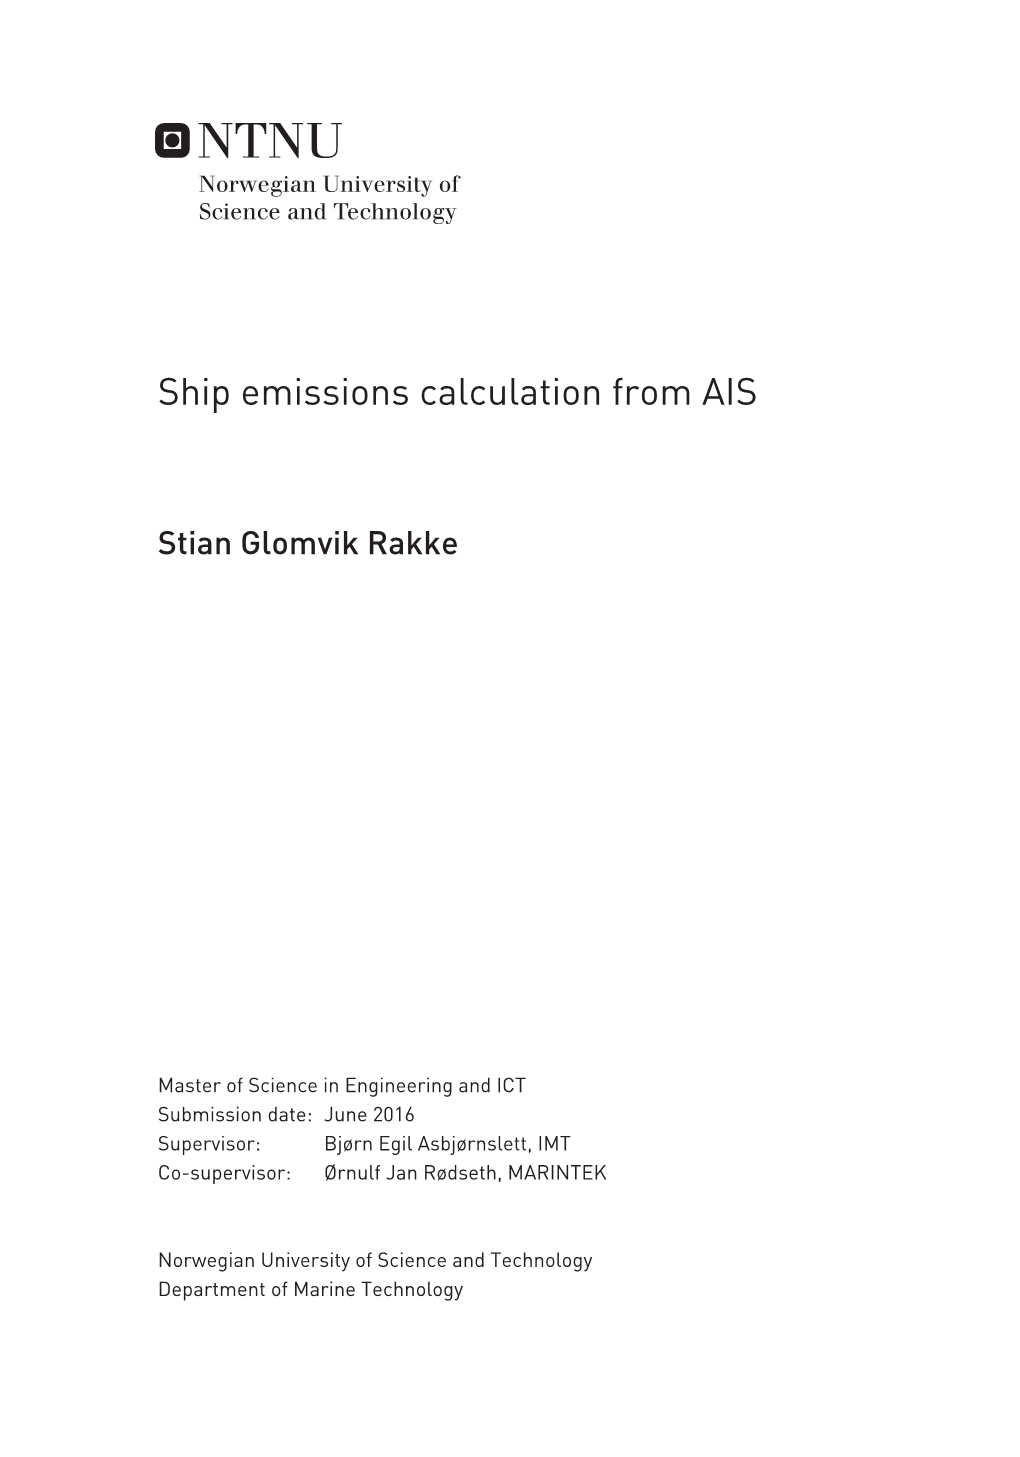 Ship Emissions Calculation from AIS